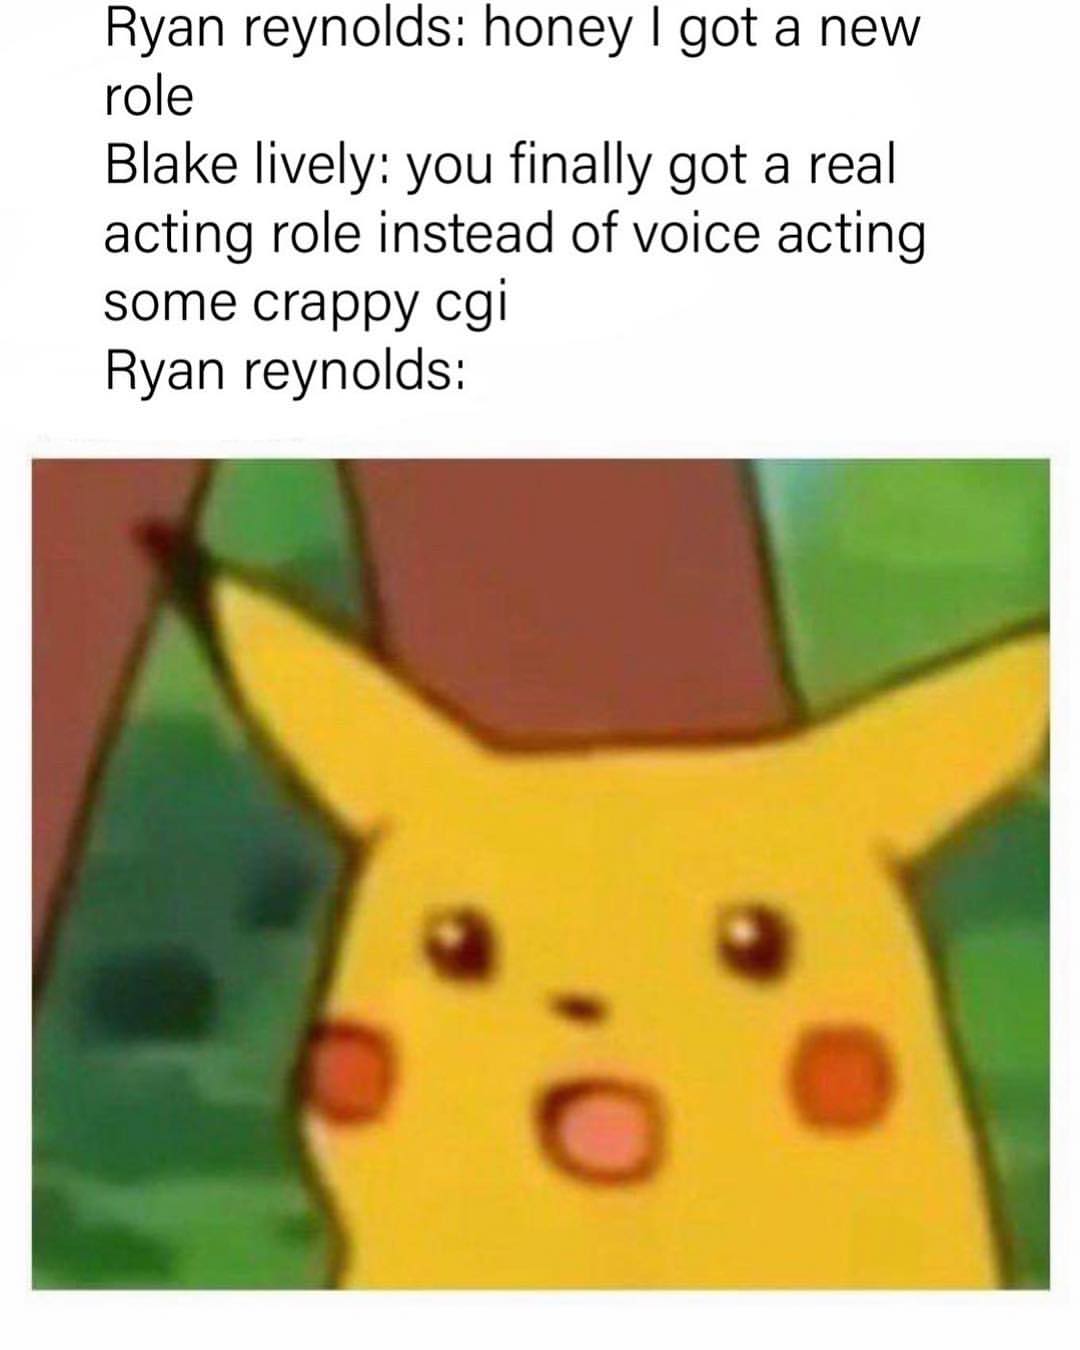 Ryan reynolds: honey I got a new role.  Blake lively: you finally got a real acting role instead of voice acting some crappy cgi.  Ryan reynolds: